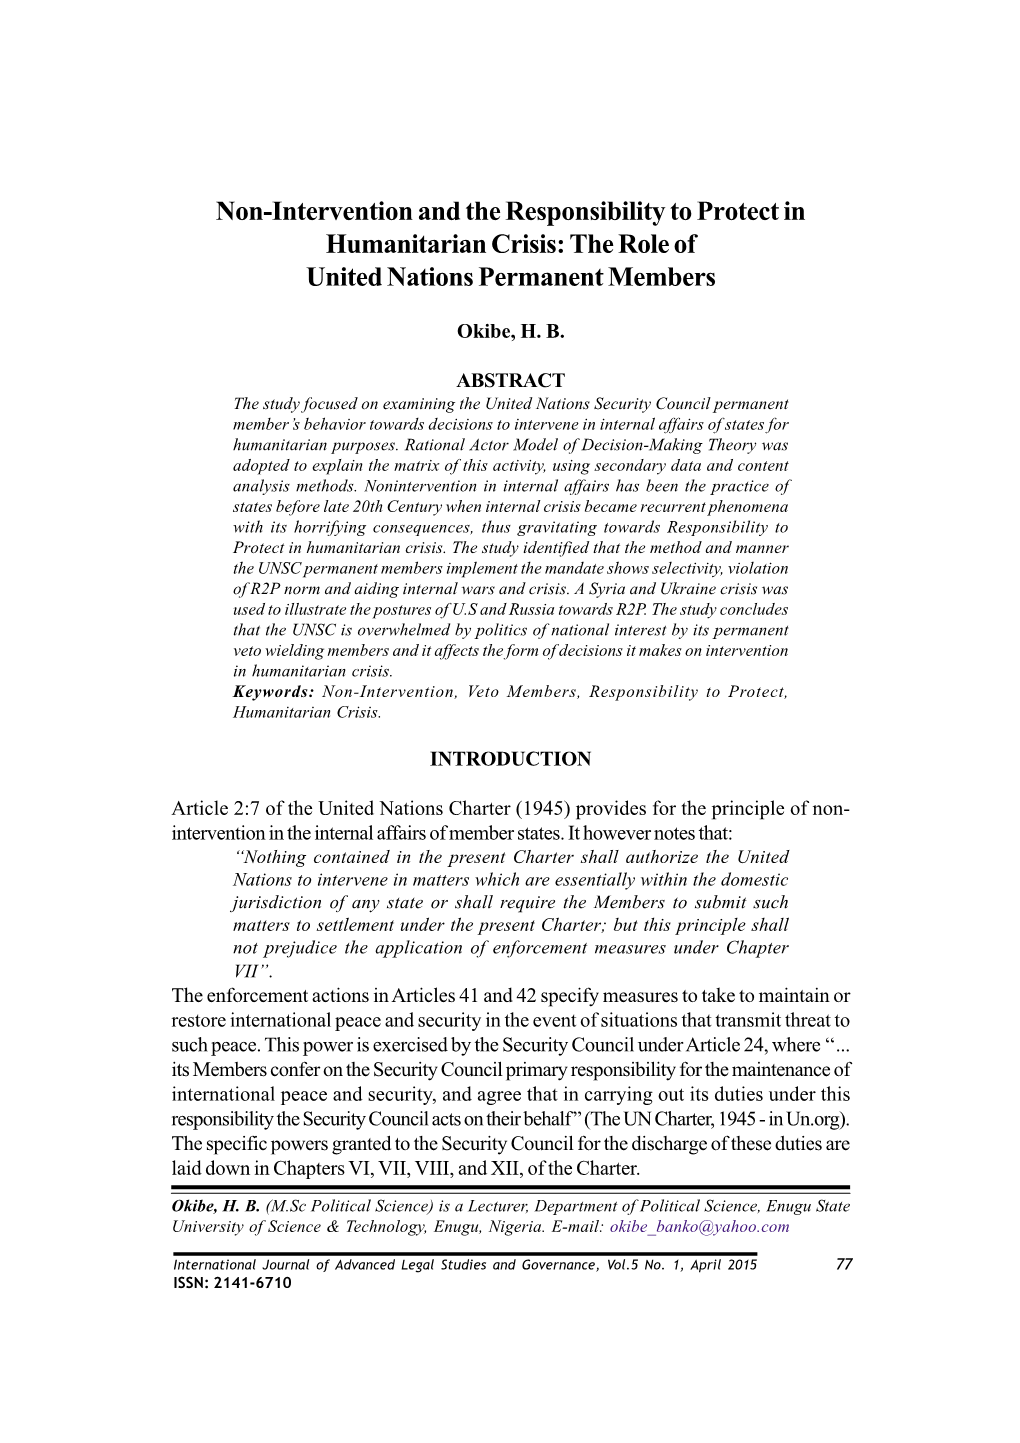 Non-Intervention and the Responsibility to Protect in Humanitarian Crisis: the Role of United Nations Permanent Members